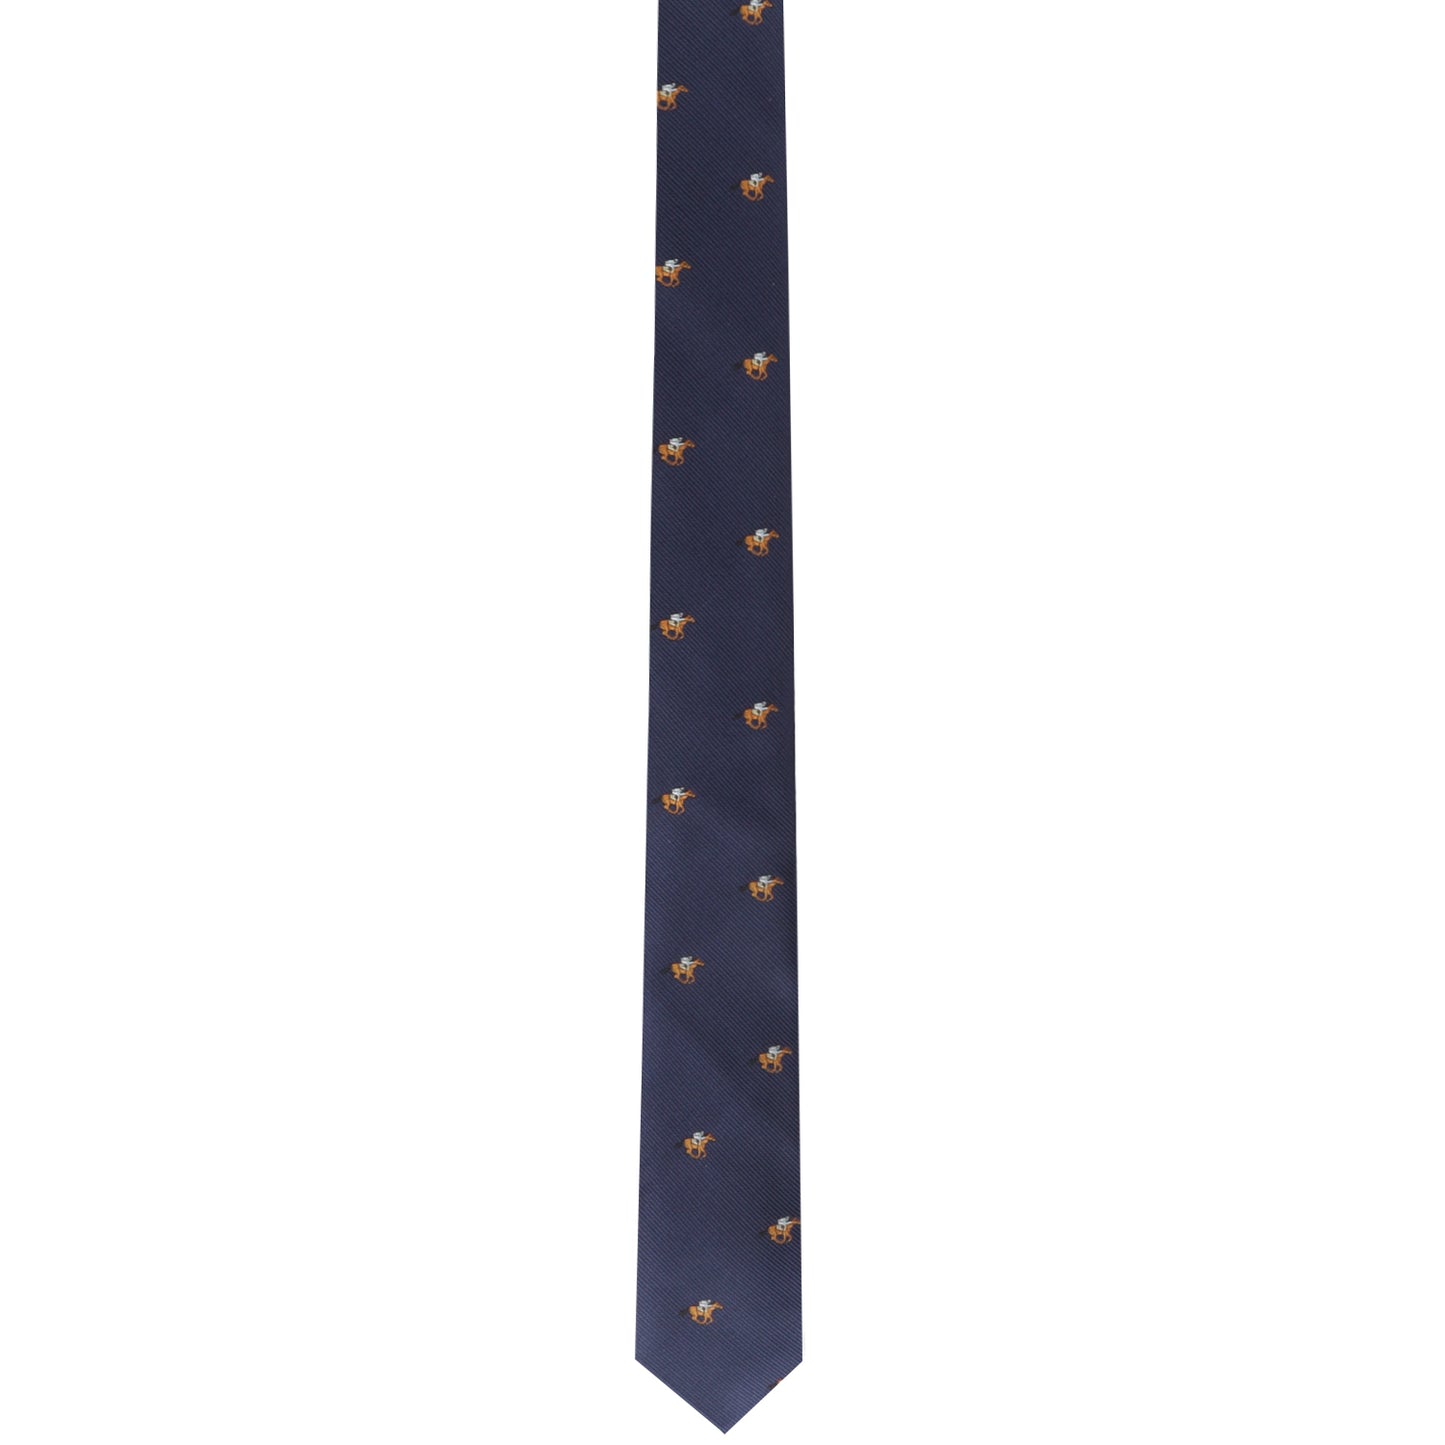 A dashing Horse Racing Skinny Tie with brown circles, imparting an air of elegance.